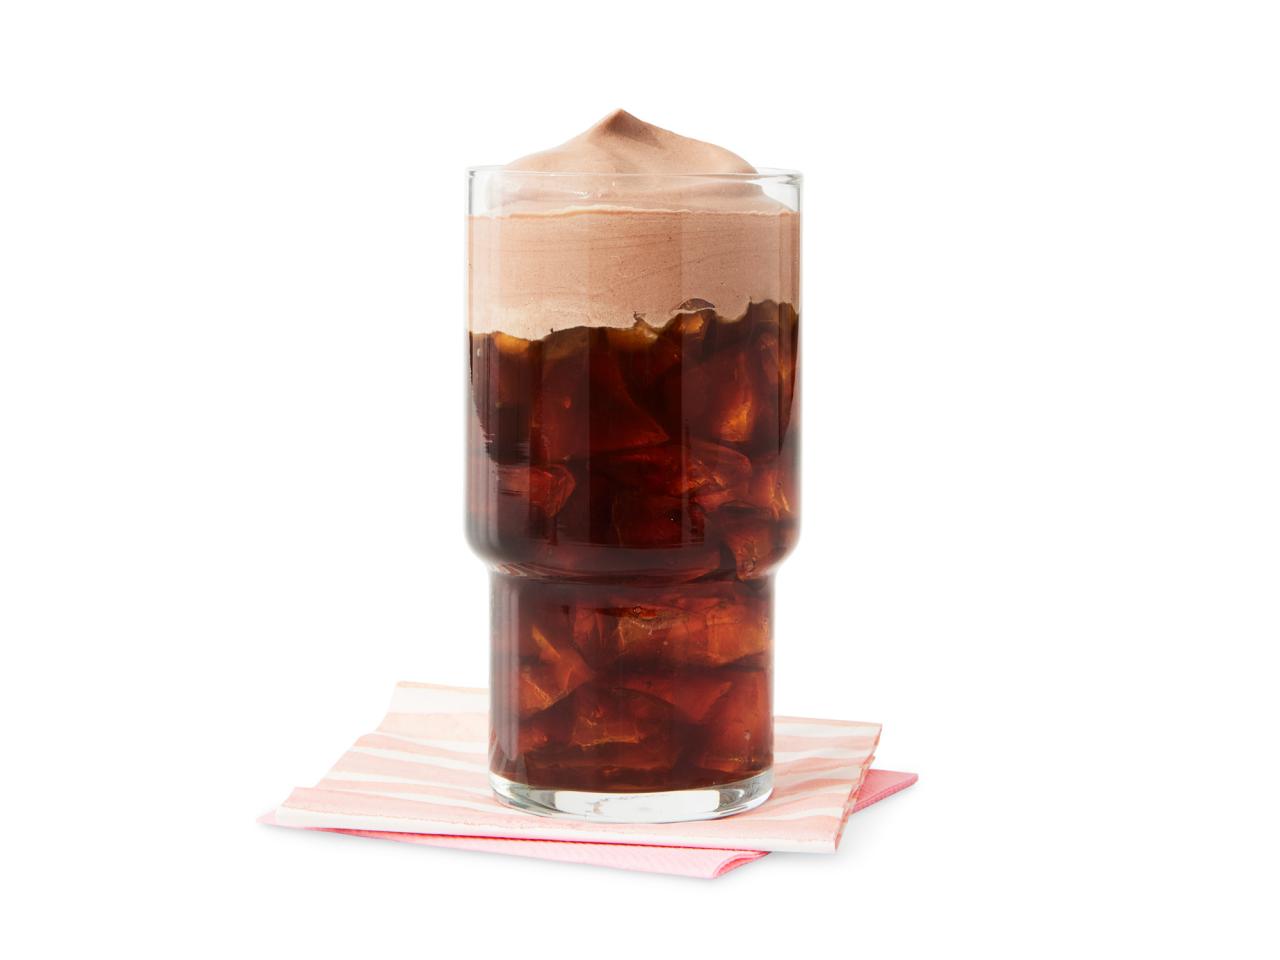 https://food.fnr.sndimg.com/content/dam/images/food/fullset/2023/7/19/FNM090123-iced-coffee-with-chocolate-cold-foam_s4x3.jpg.rend.hgtvcom.1280.960.suffix/1689795884920.jpeg